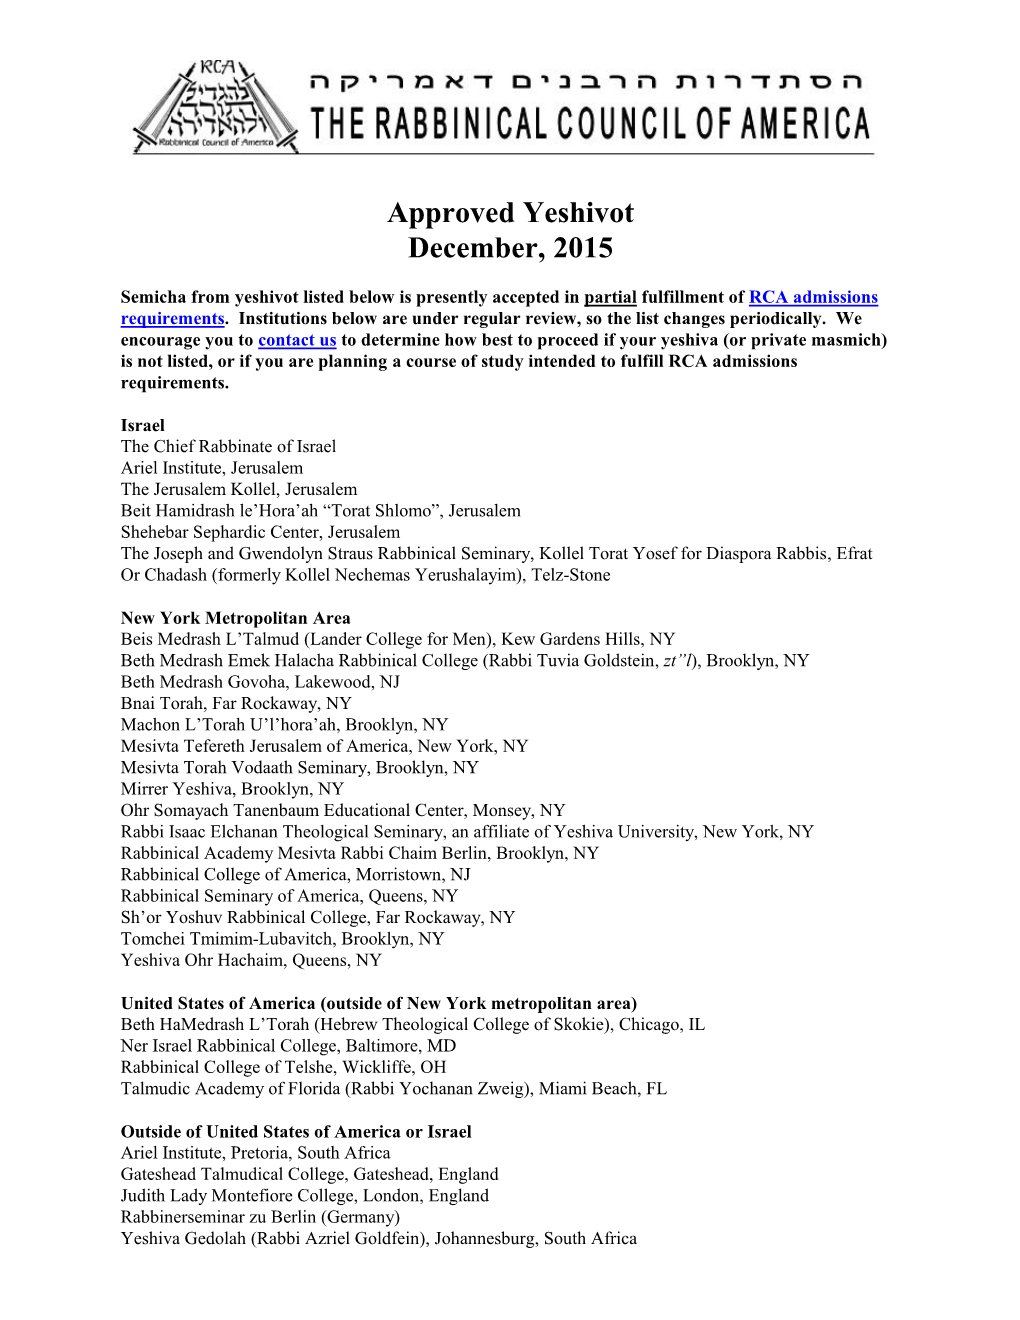 List of Approved Yeshivot